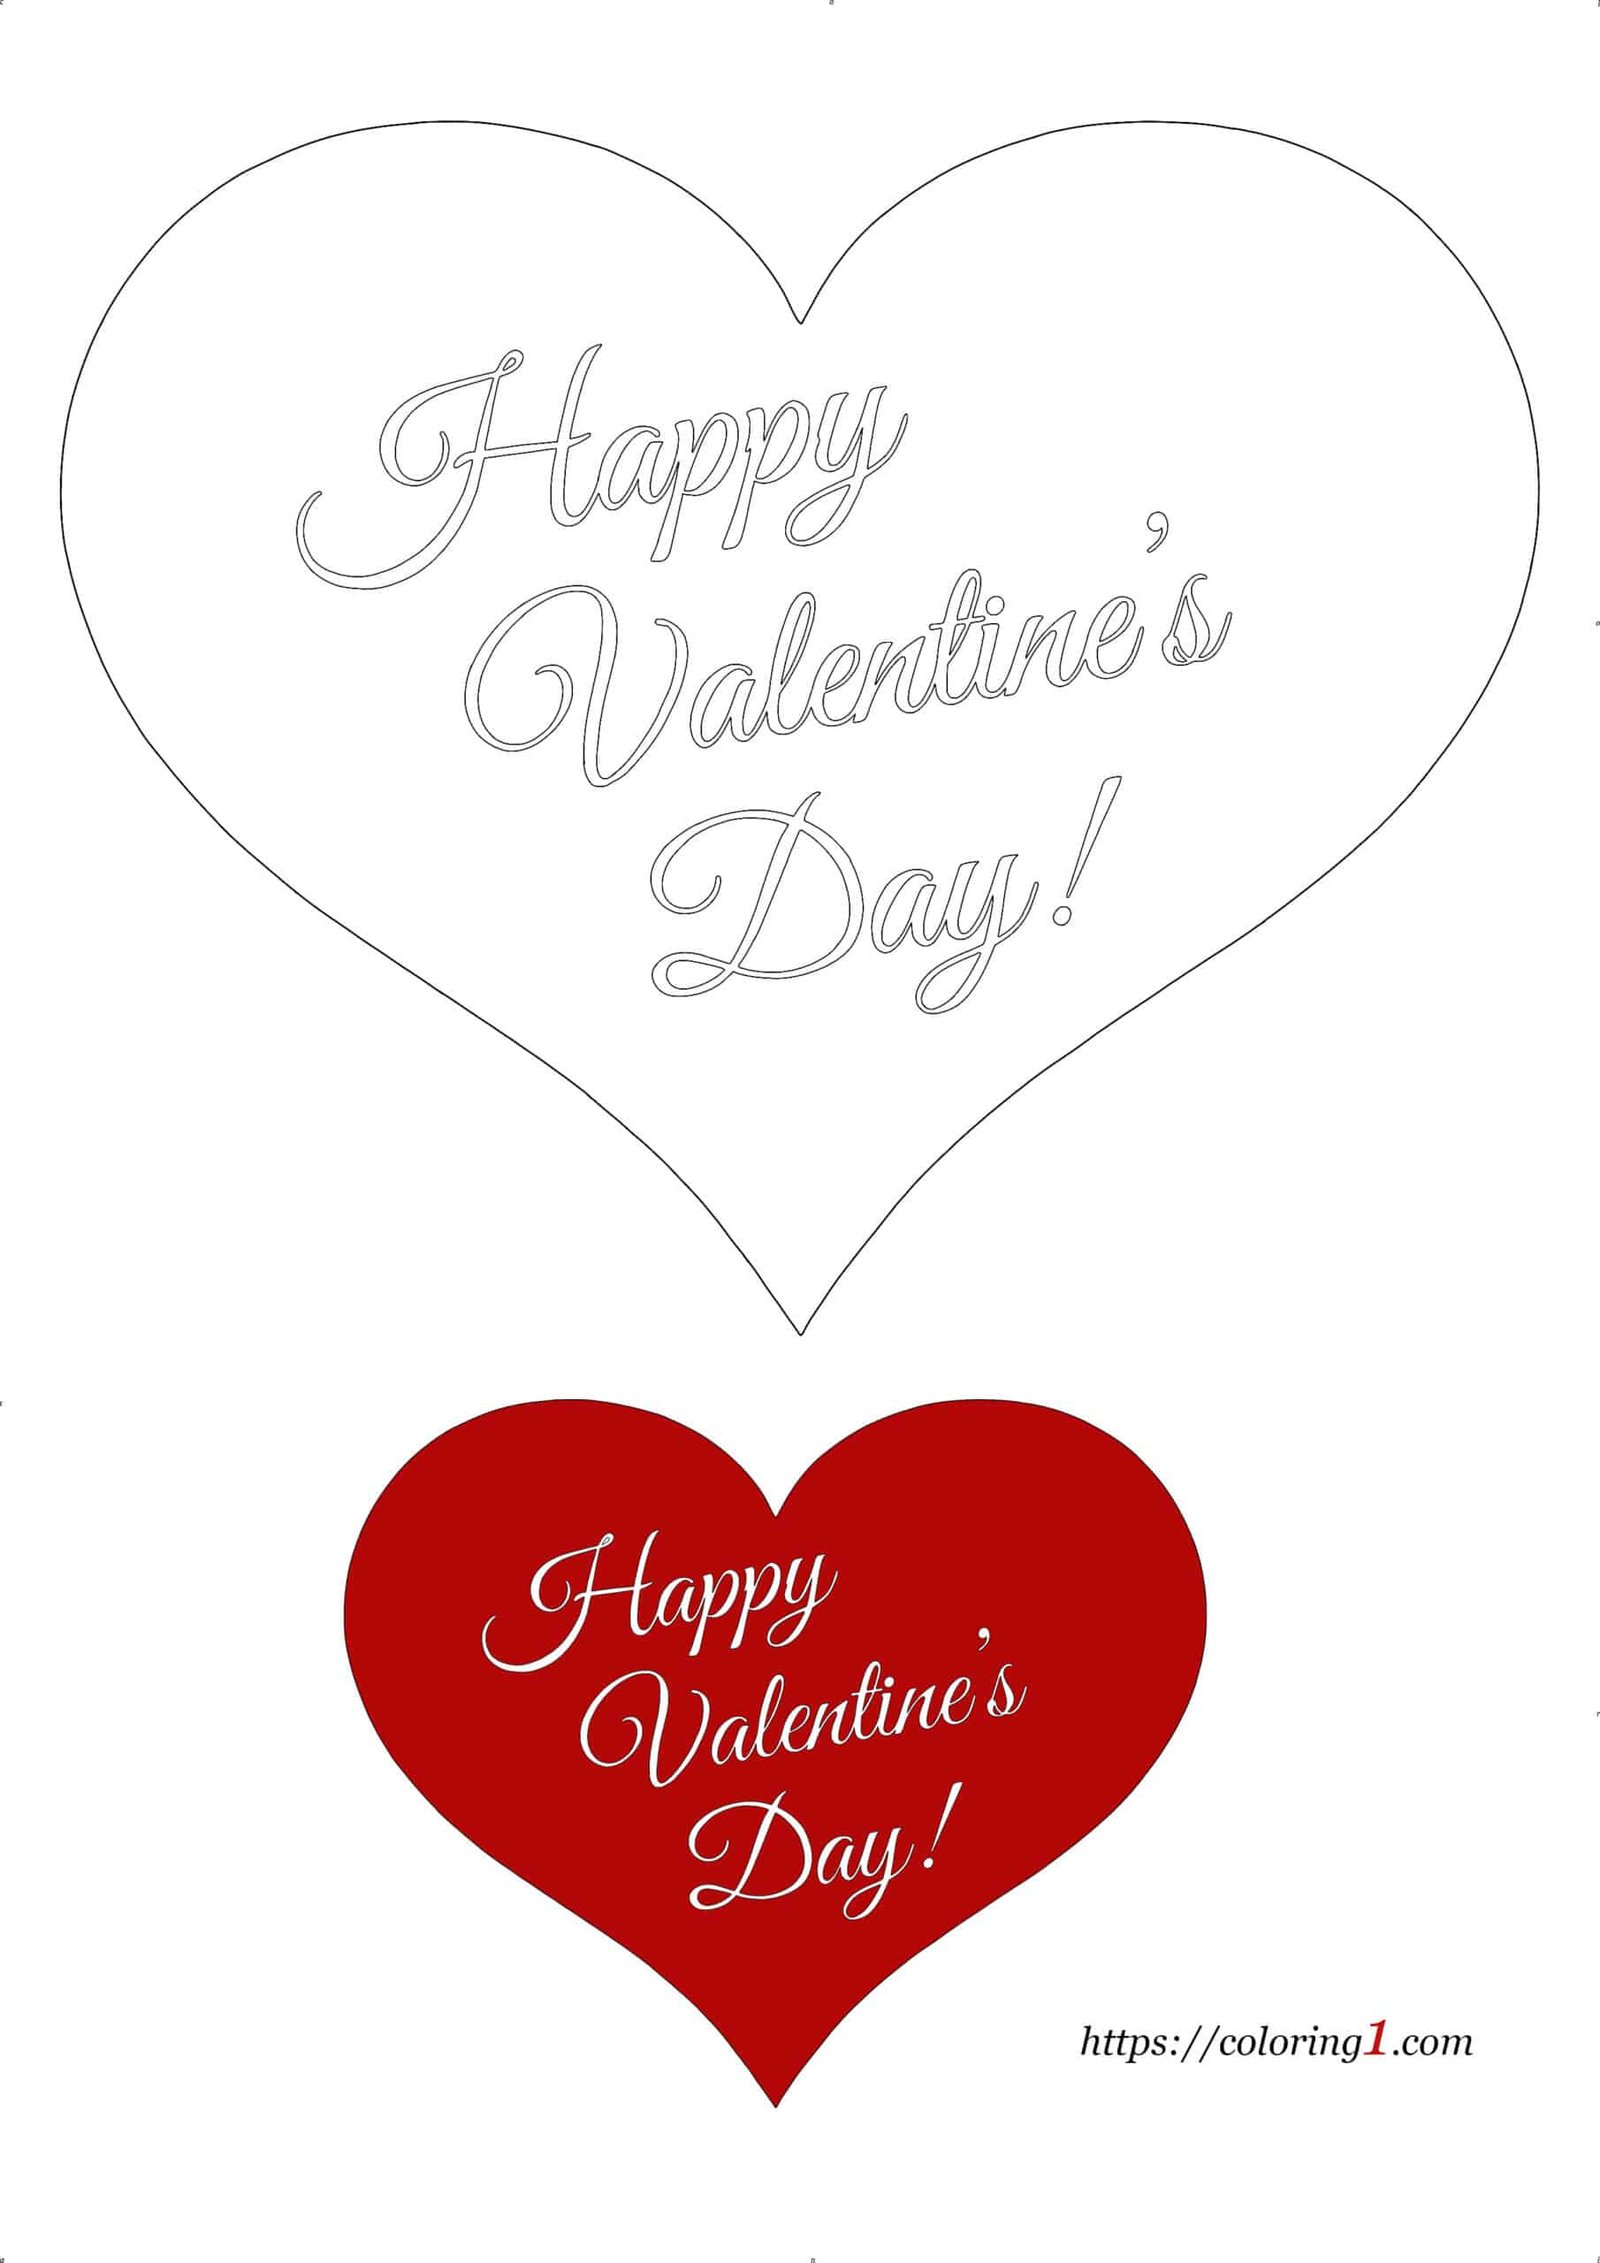 Happy Valentines Day heart coloring page to print for adults and kids